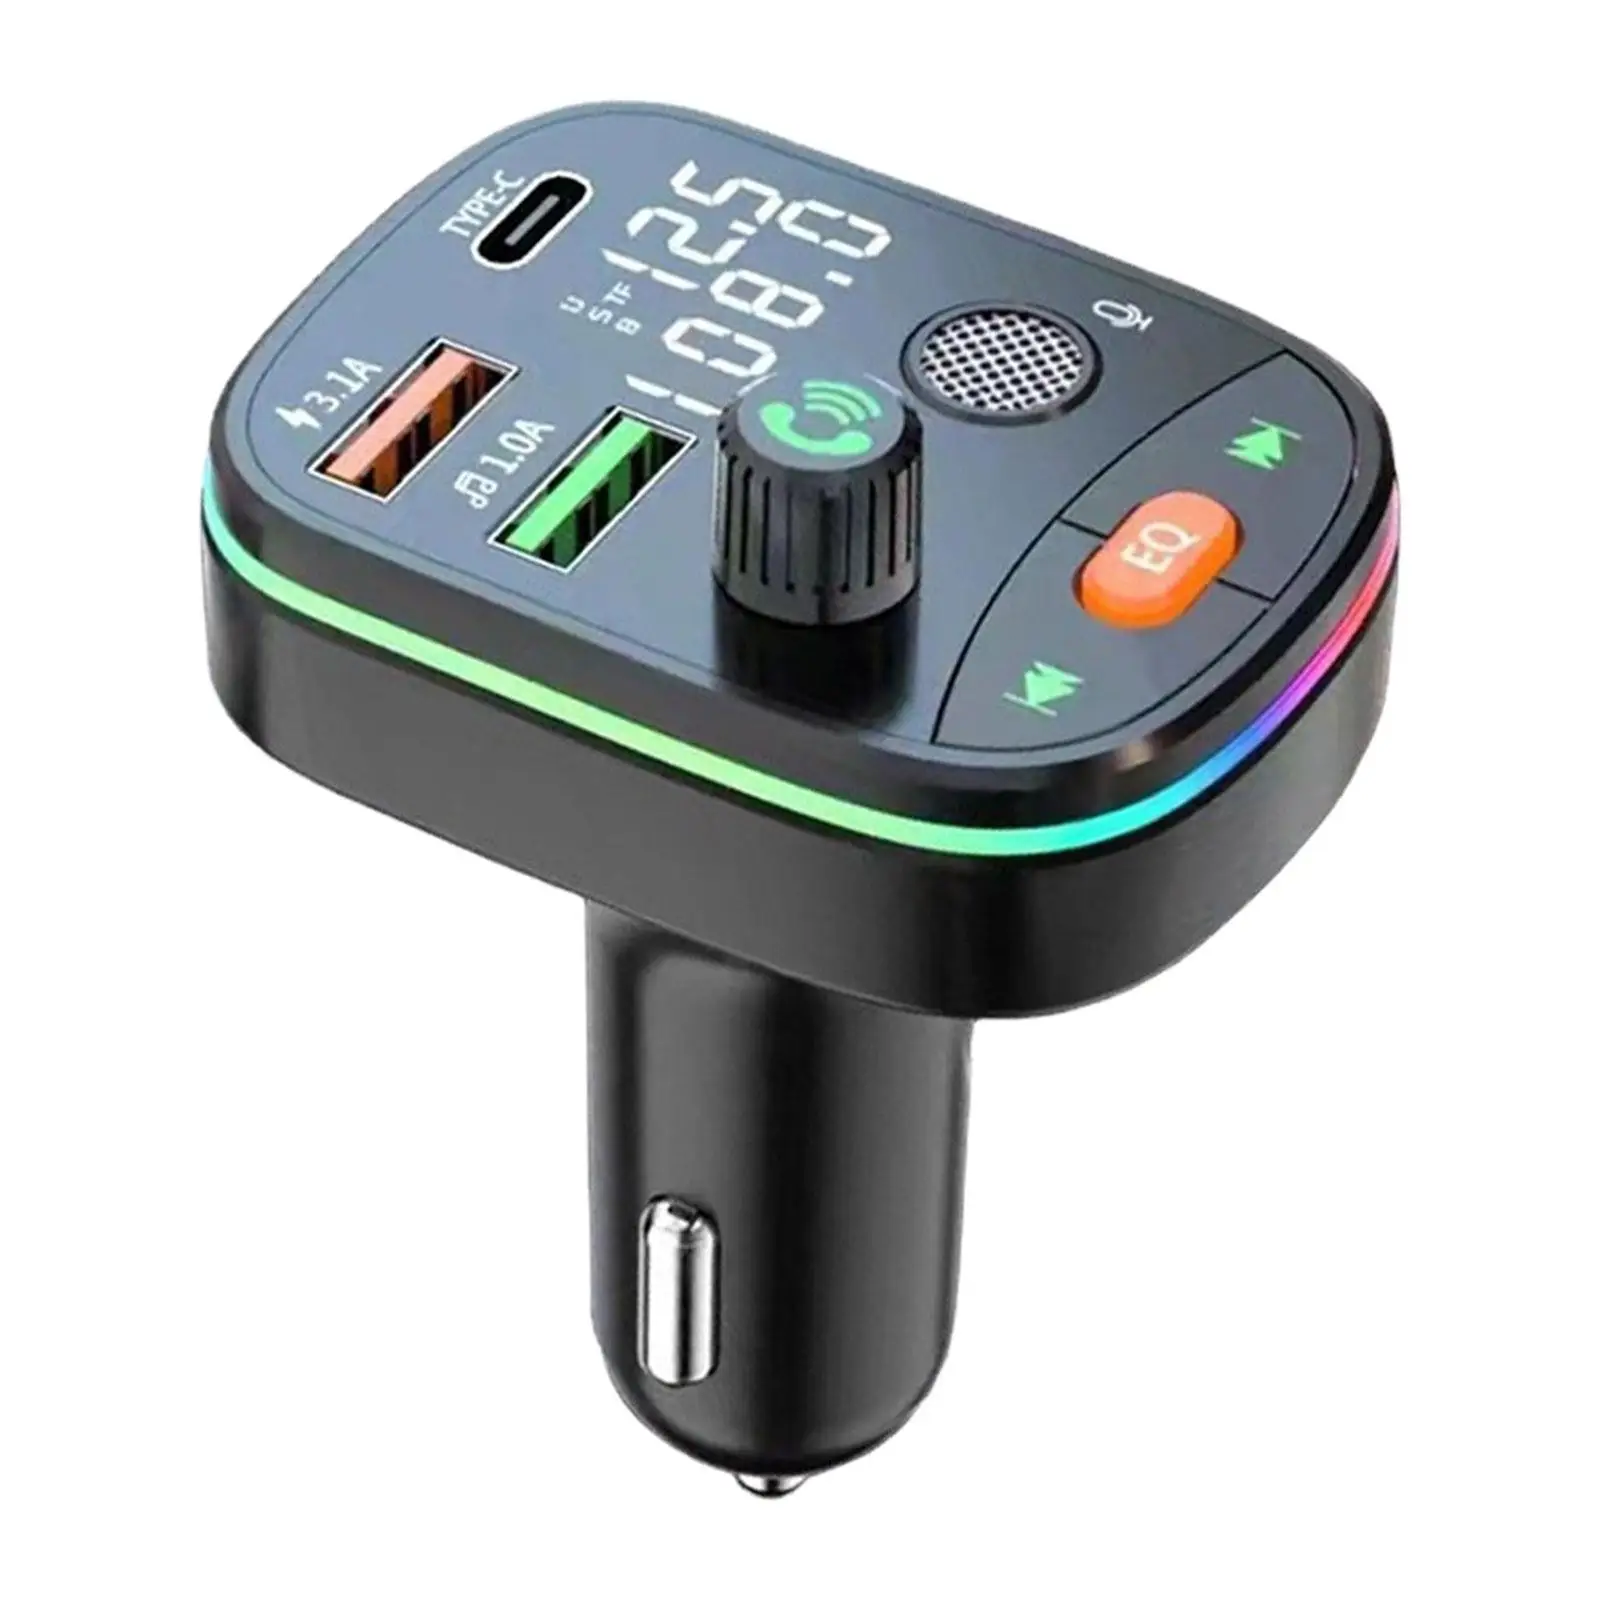 V5.0 FM Bluetooth Transmitter Colorful Atmosphere Lights Dual Screens Display Easy to Install Handsfree Calling Music Player